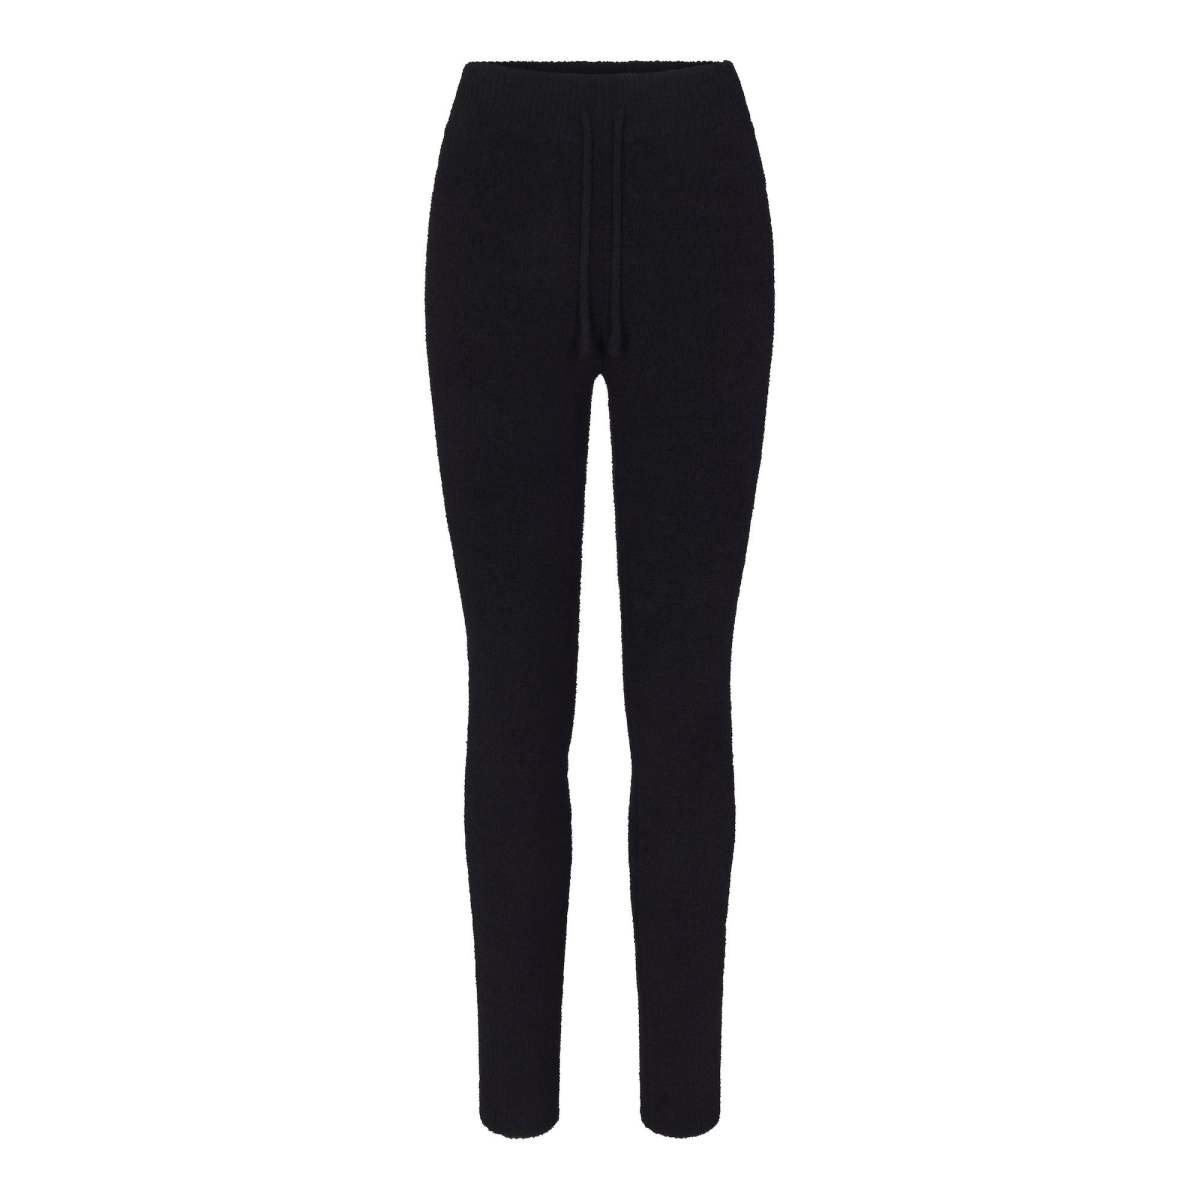 Stay Cozy and Stylish with Champion Fleece Lined Leggings